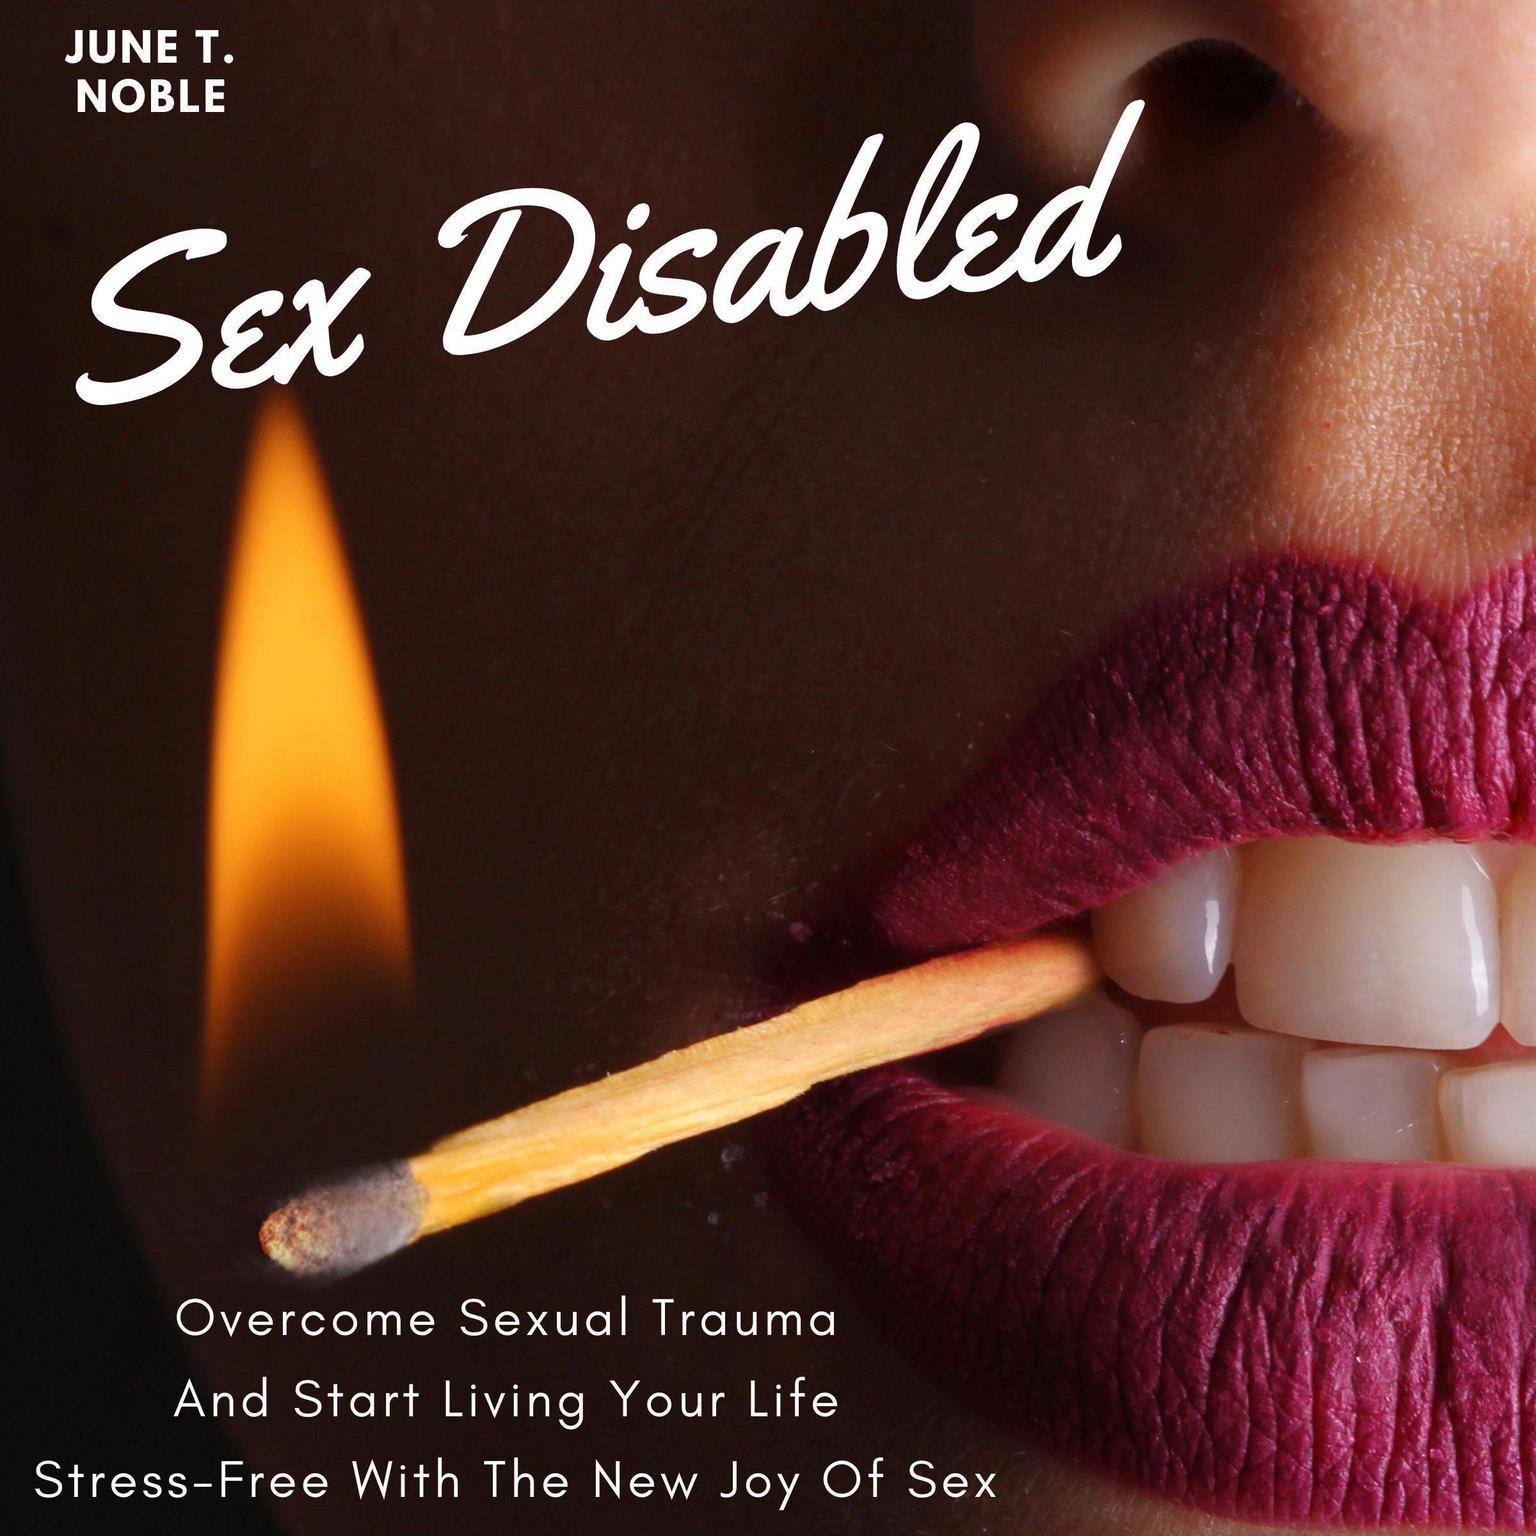 Sex Disabled: Overcome Sexual Trauma And Start Living Your Life Stress-Free With The New Joy Of Sex Audiobook, by June T. Noble